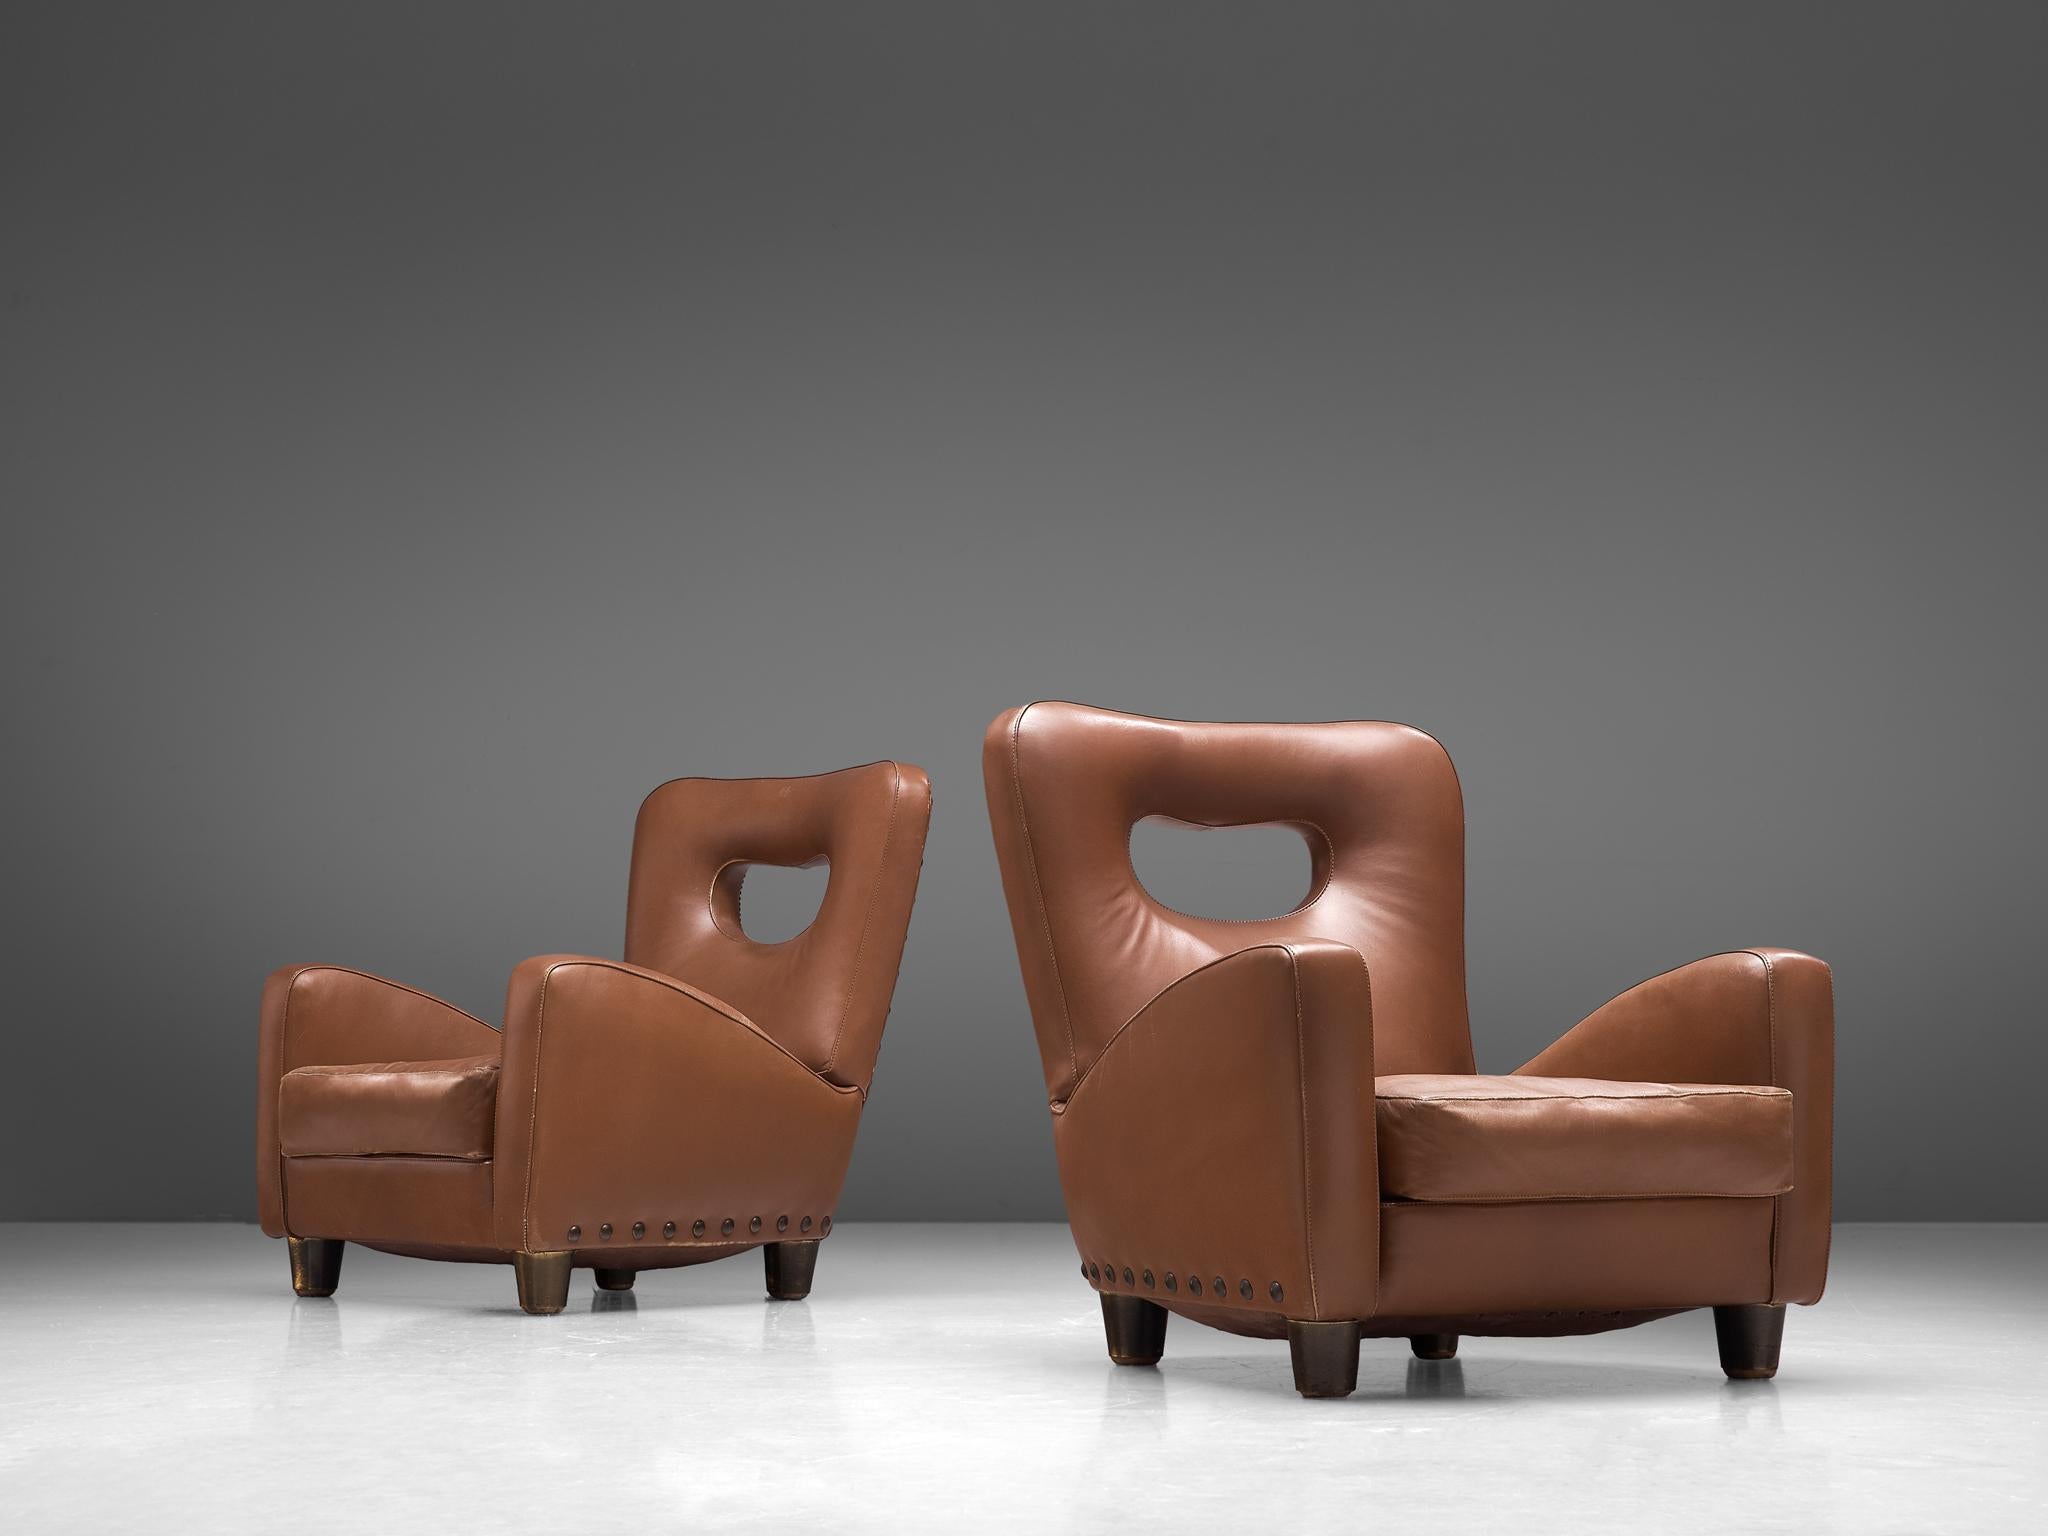 Giovanni Gariboldi for Colli, pair of lounge chairs, leather, wood and bronze nails, Italy, circa 1950.

A rare pair of sturdy lounge chairs in cognac leather designed by Giovanni Gariboldi. The easy chairs show voluptuous, round lines. The most